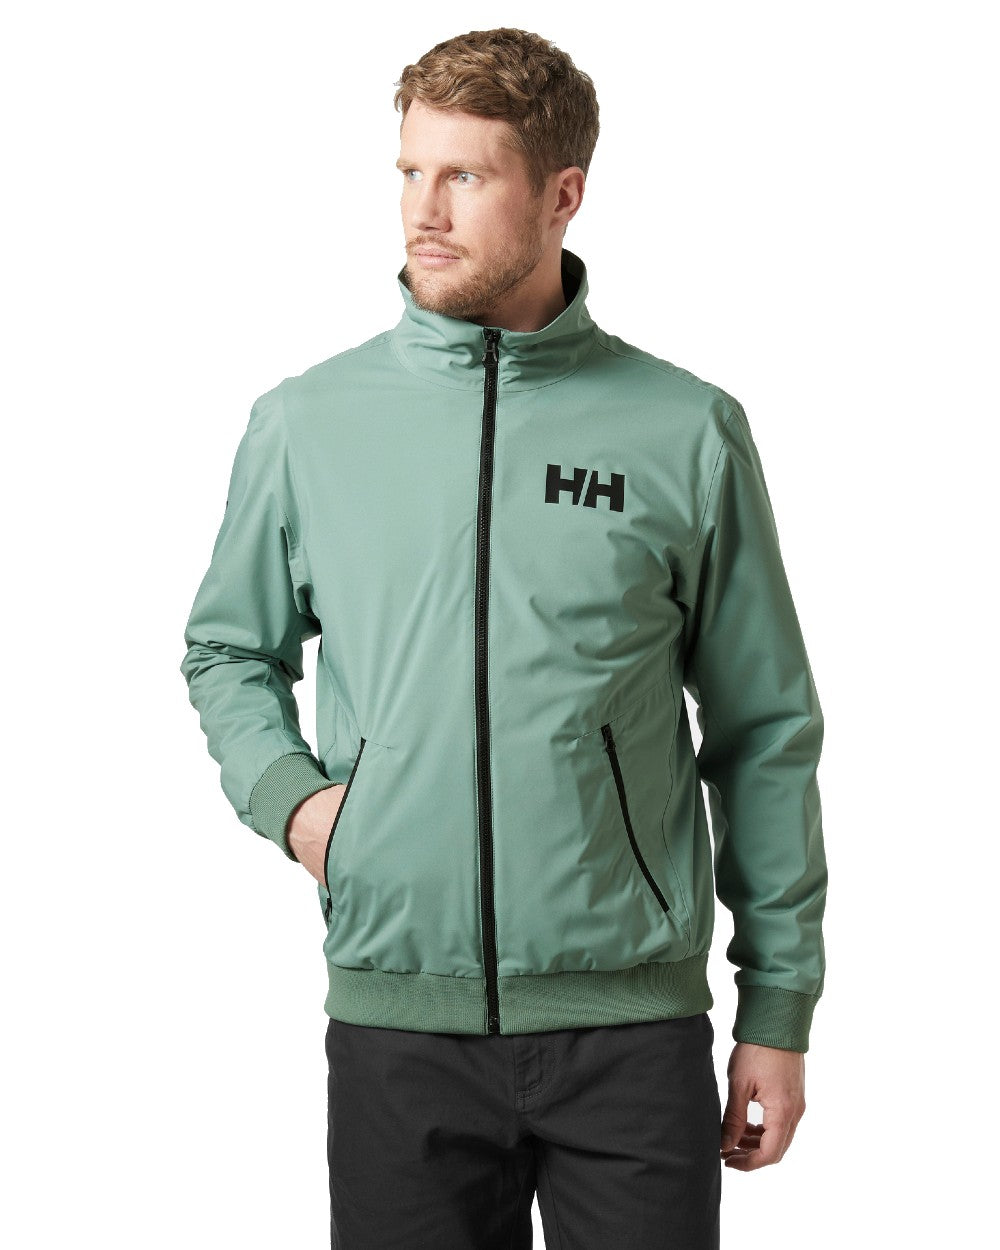 Cactus coloured Helly Hansen Mens HP Racing Bomber Sailing Jacket 2.0 on white background 